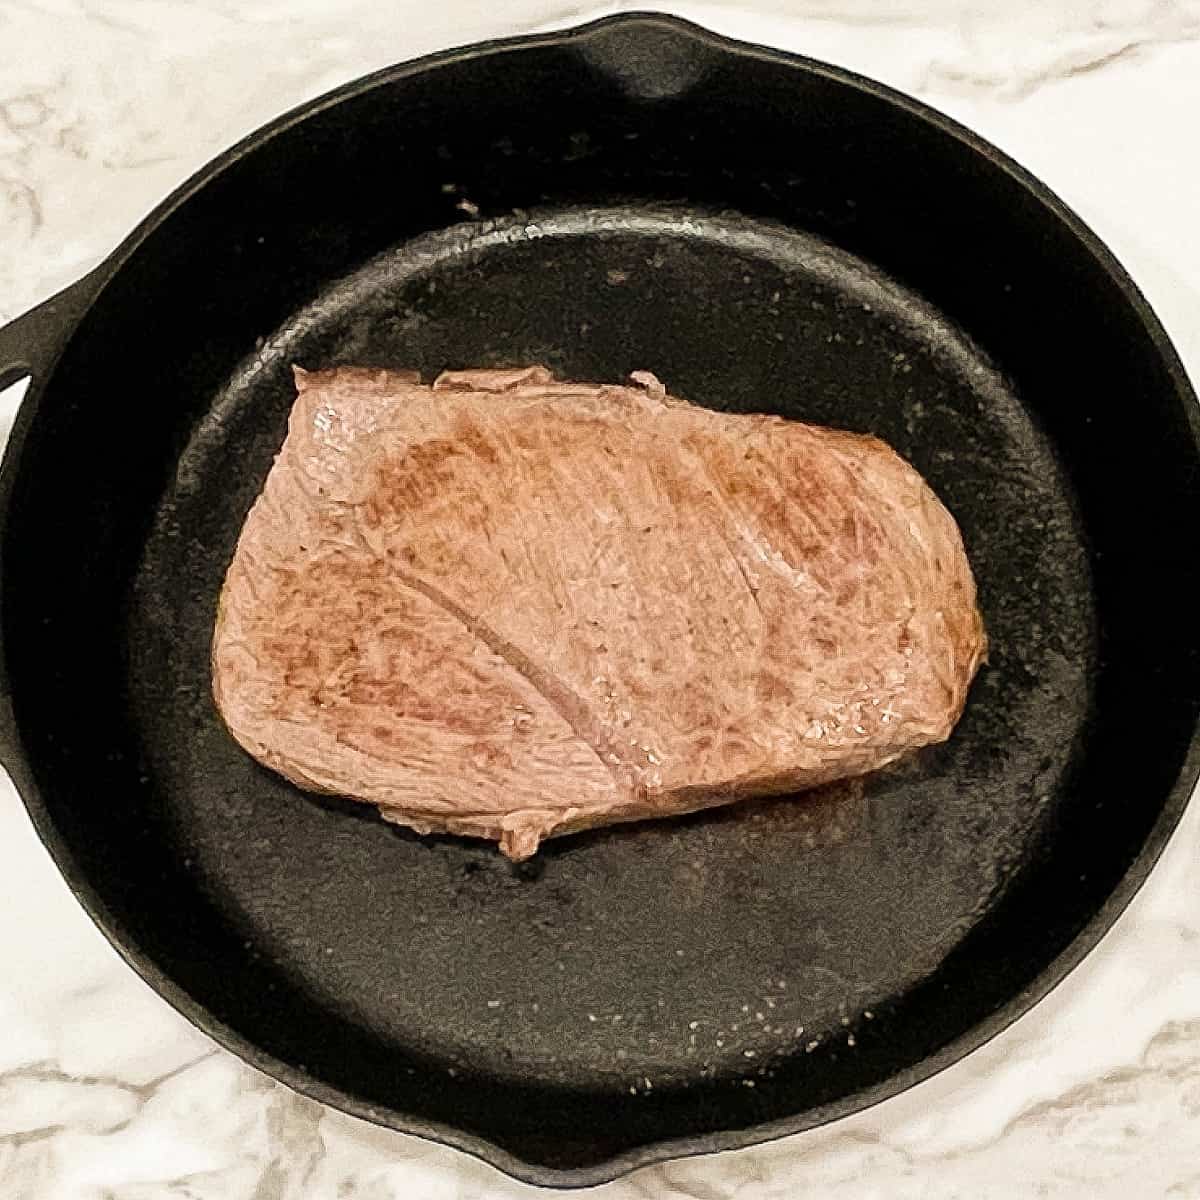 sear the meat